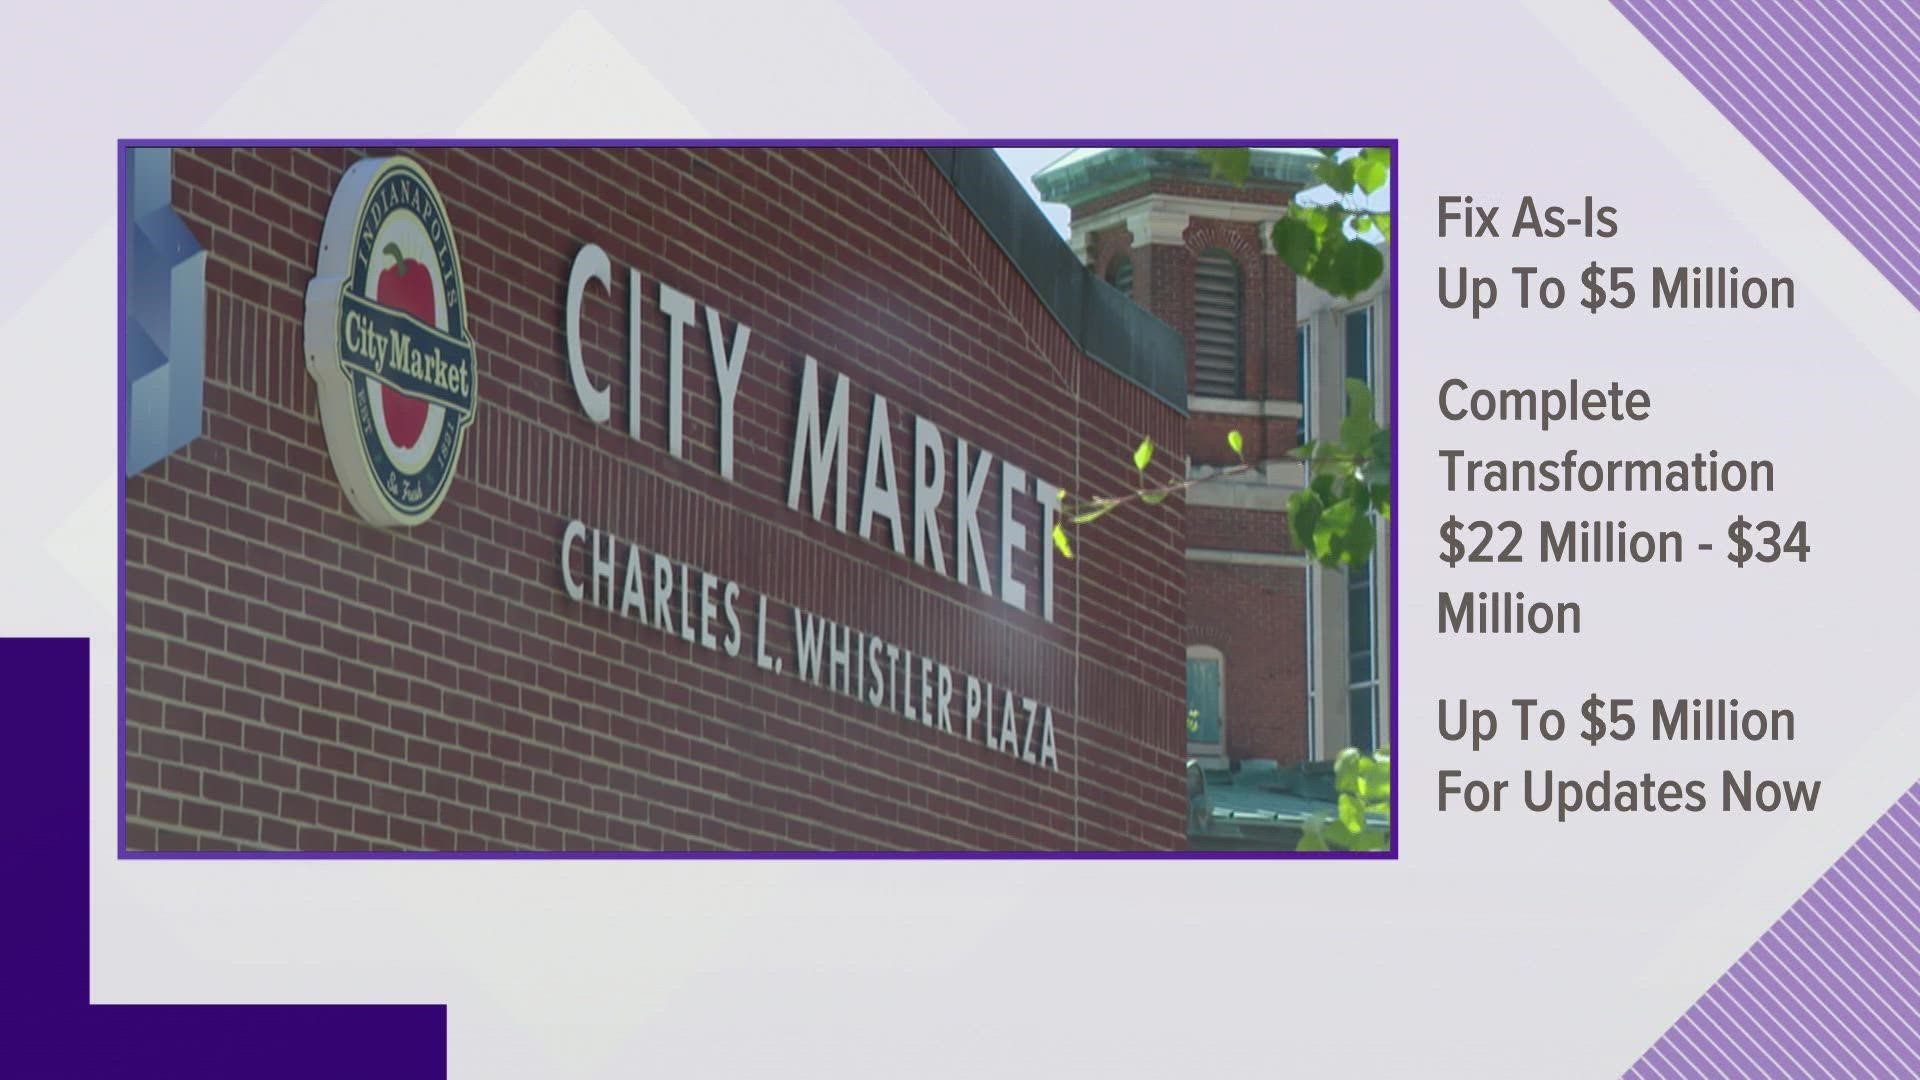 The downtown destination's upgrades would start with a $5 million investment by the city.